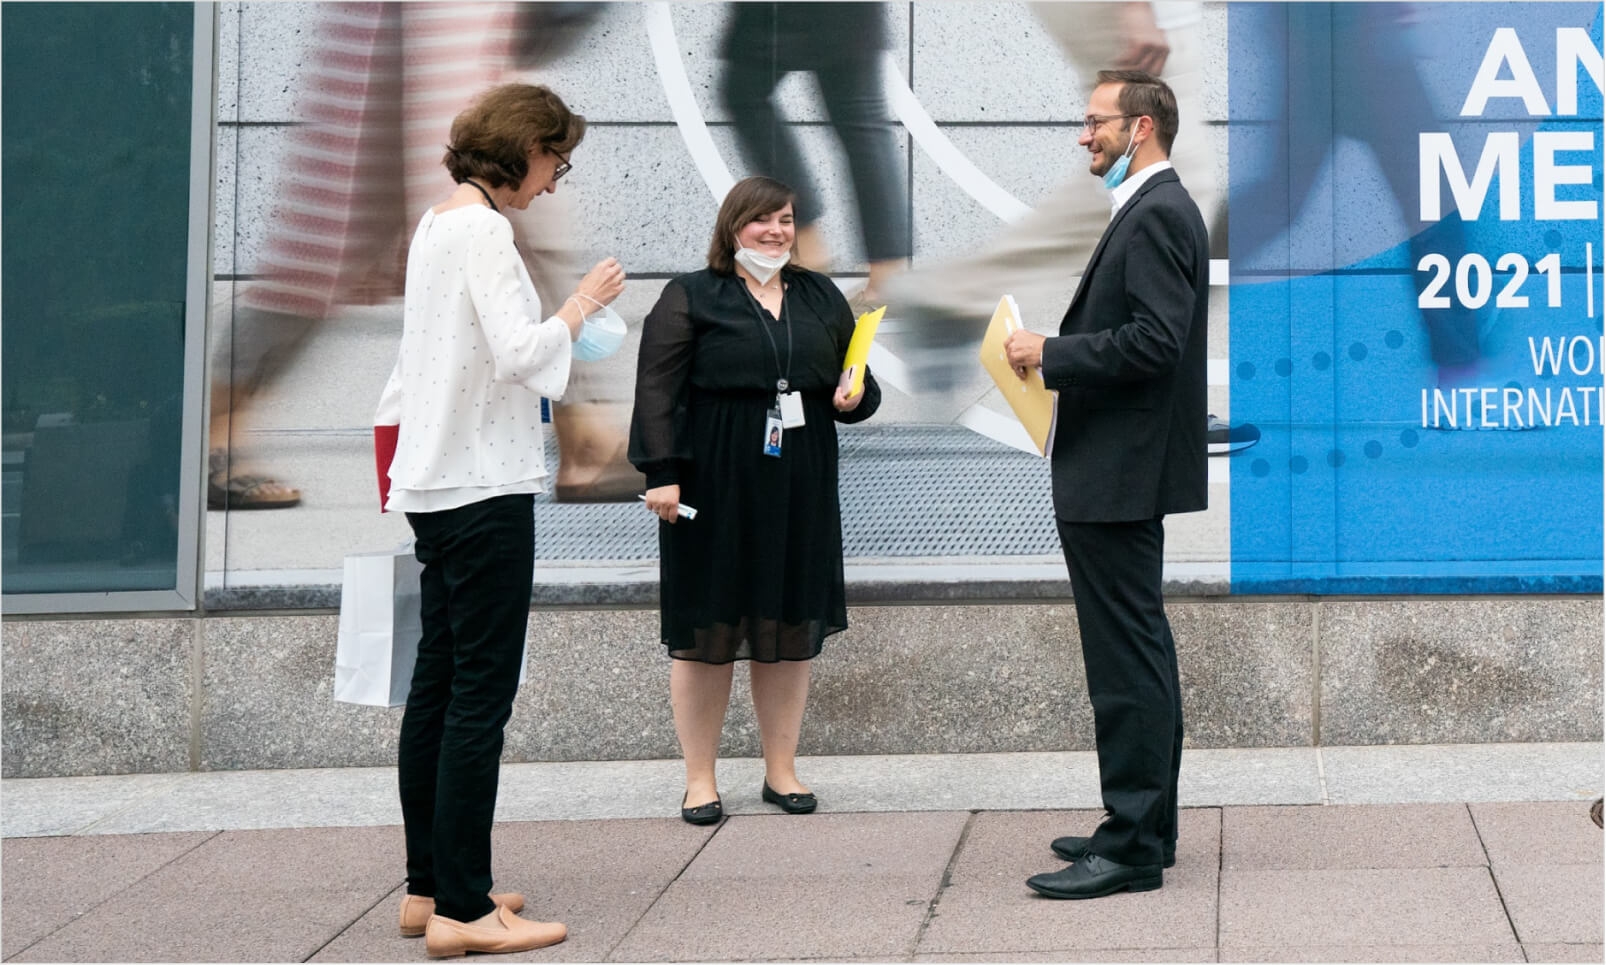 A male and two female colleagues on a sidewalk in Washington, D.C.